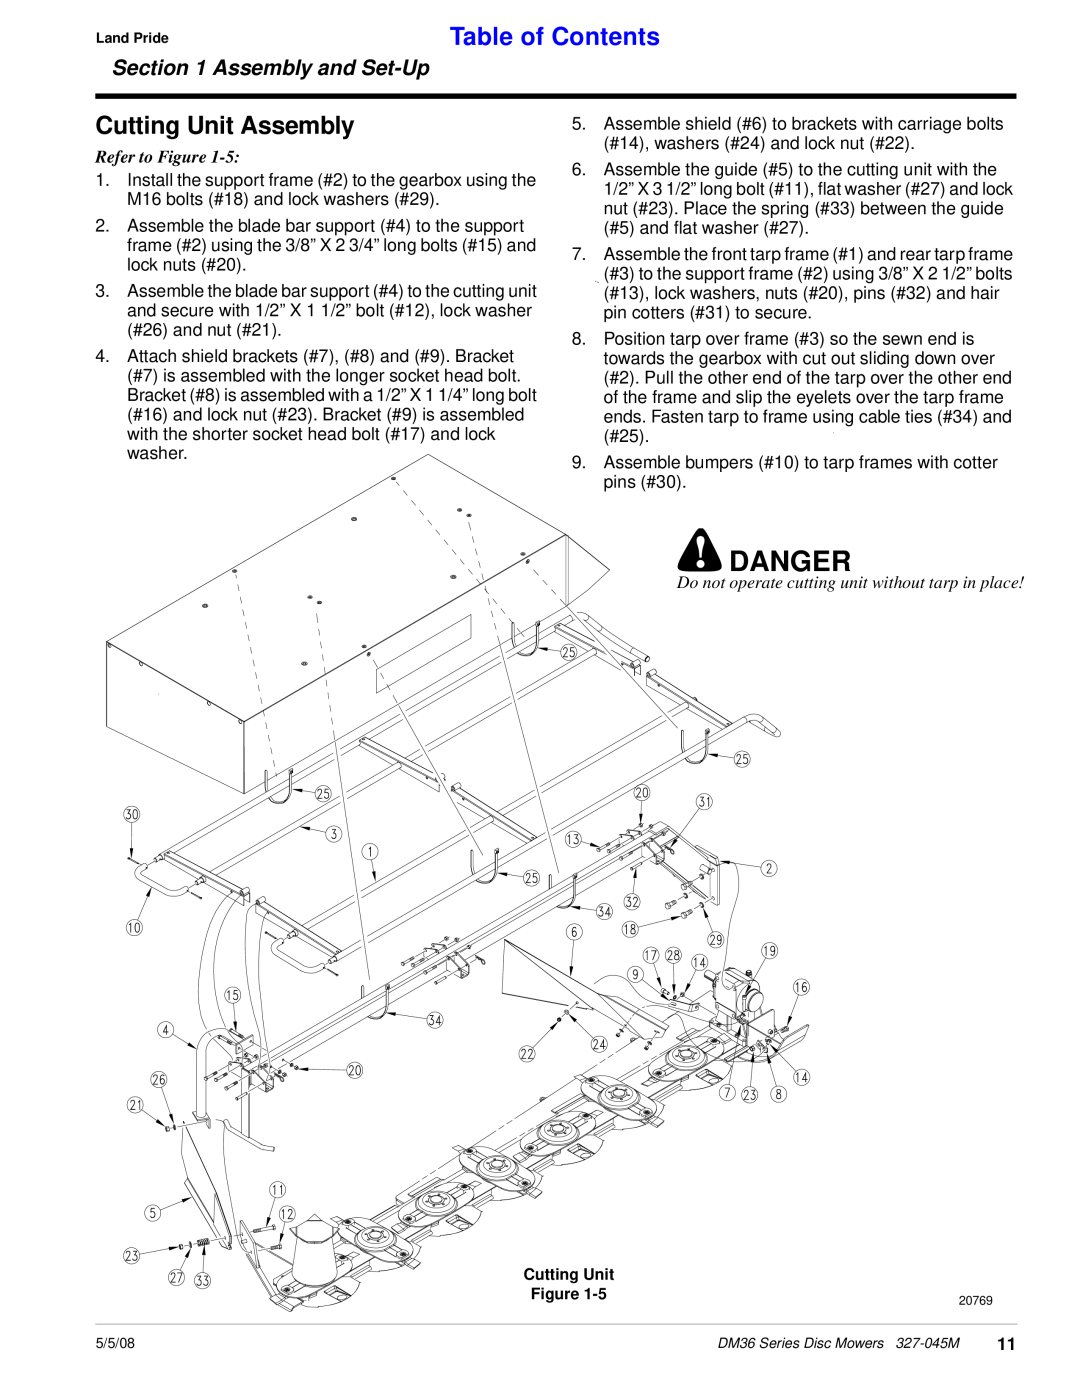 Land Pride DM36 Series manual Danger, Cutting Unit Assembly, Table of Contents, Assembly and Set-Up, Refer to Figure 